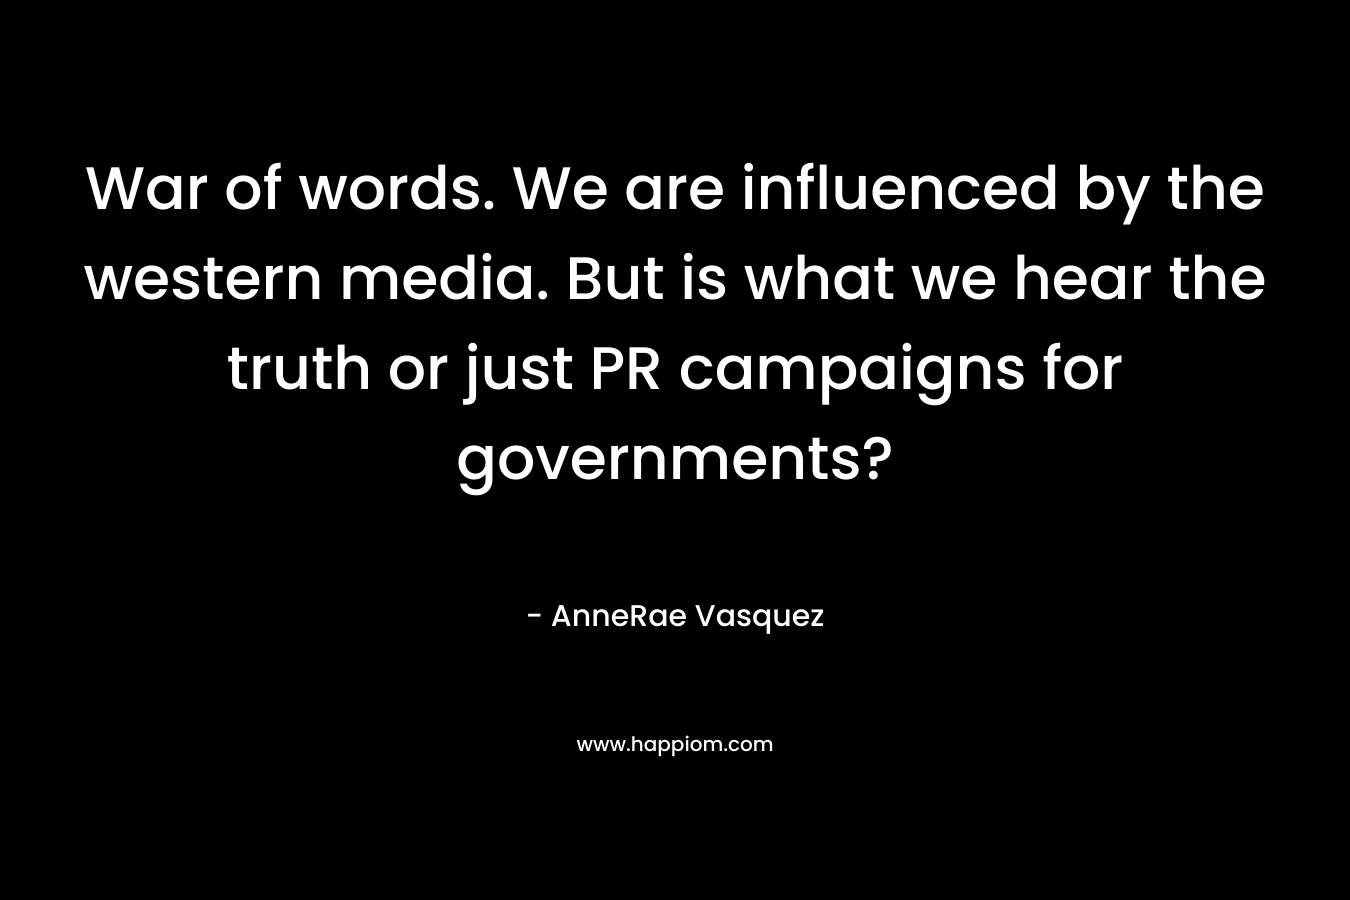 War of words. We are influenced by the western media. But is what we hear the truth or just PR campaigns for governments?